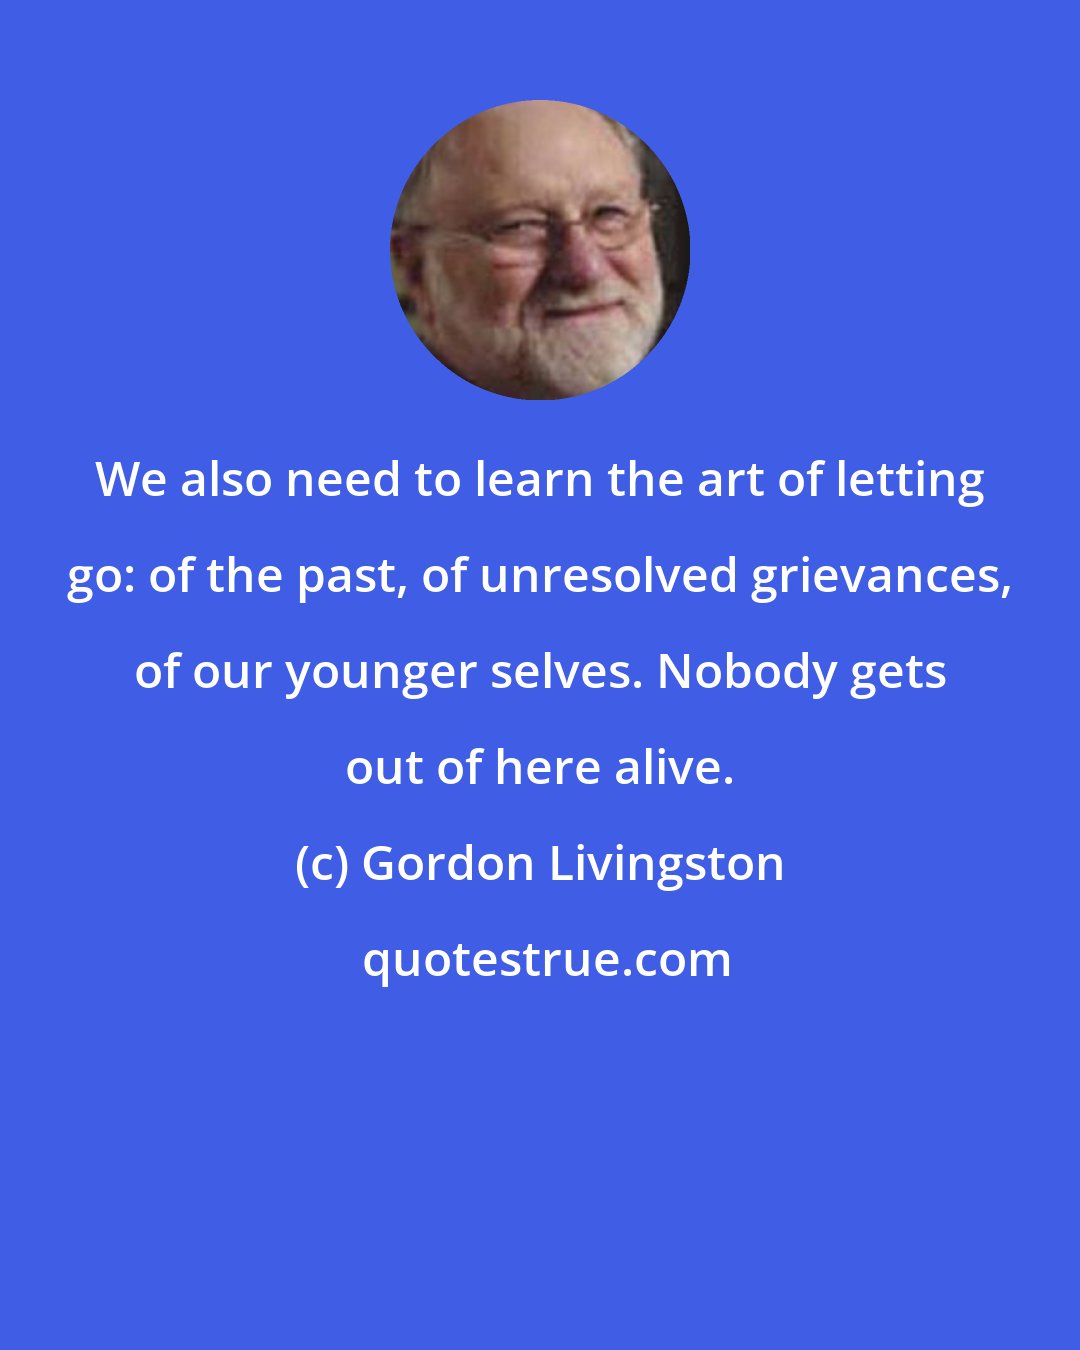 Gordon Livingston: We also need to learn the art of letting go: of the past, of unresolved grievances, of our younger selves. Nobody gets out of here alive.